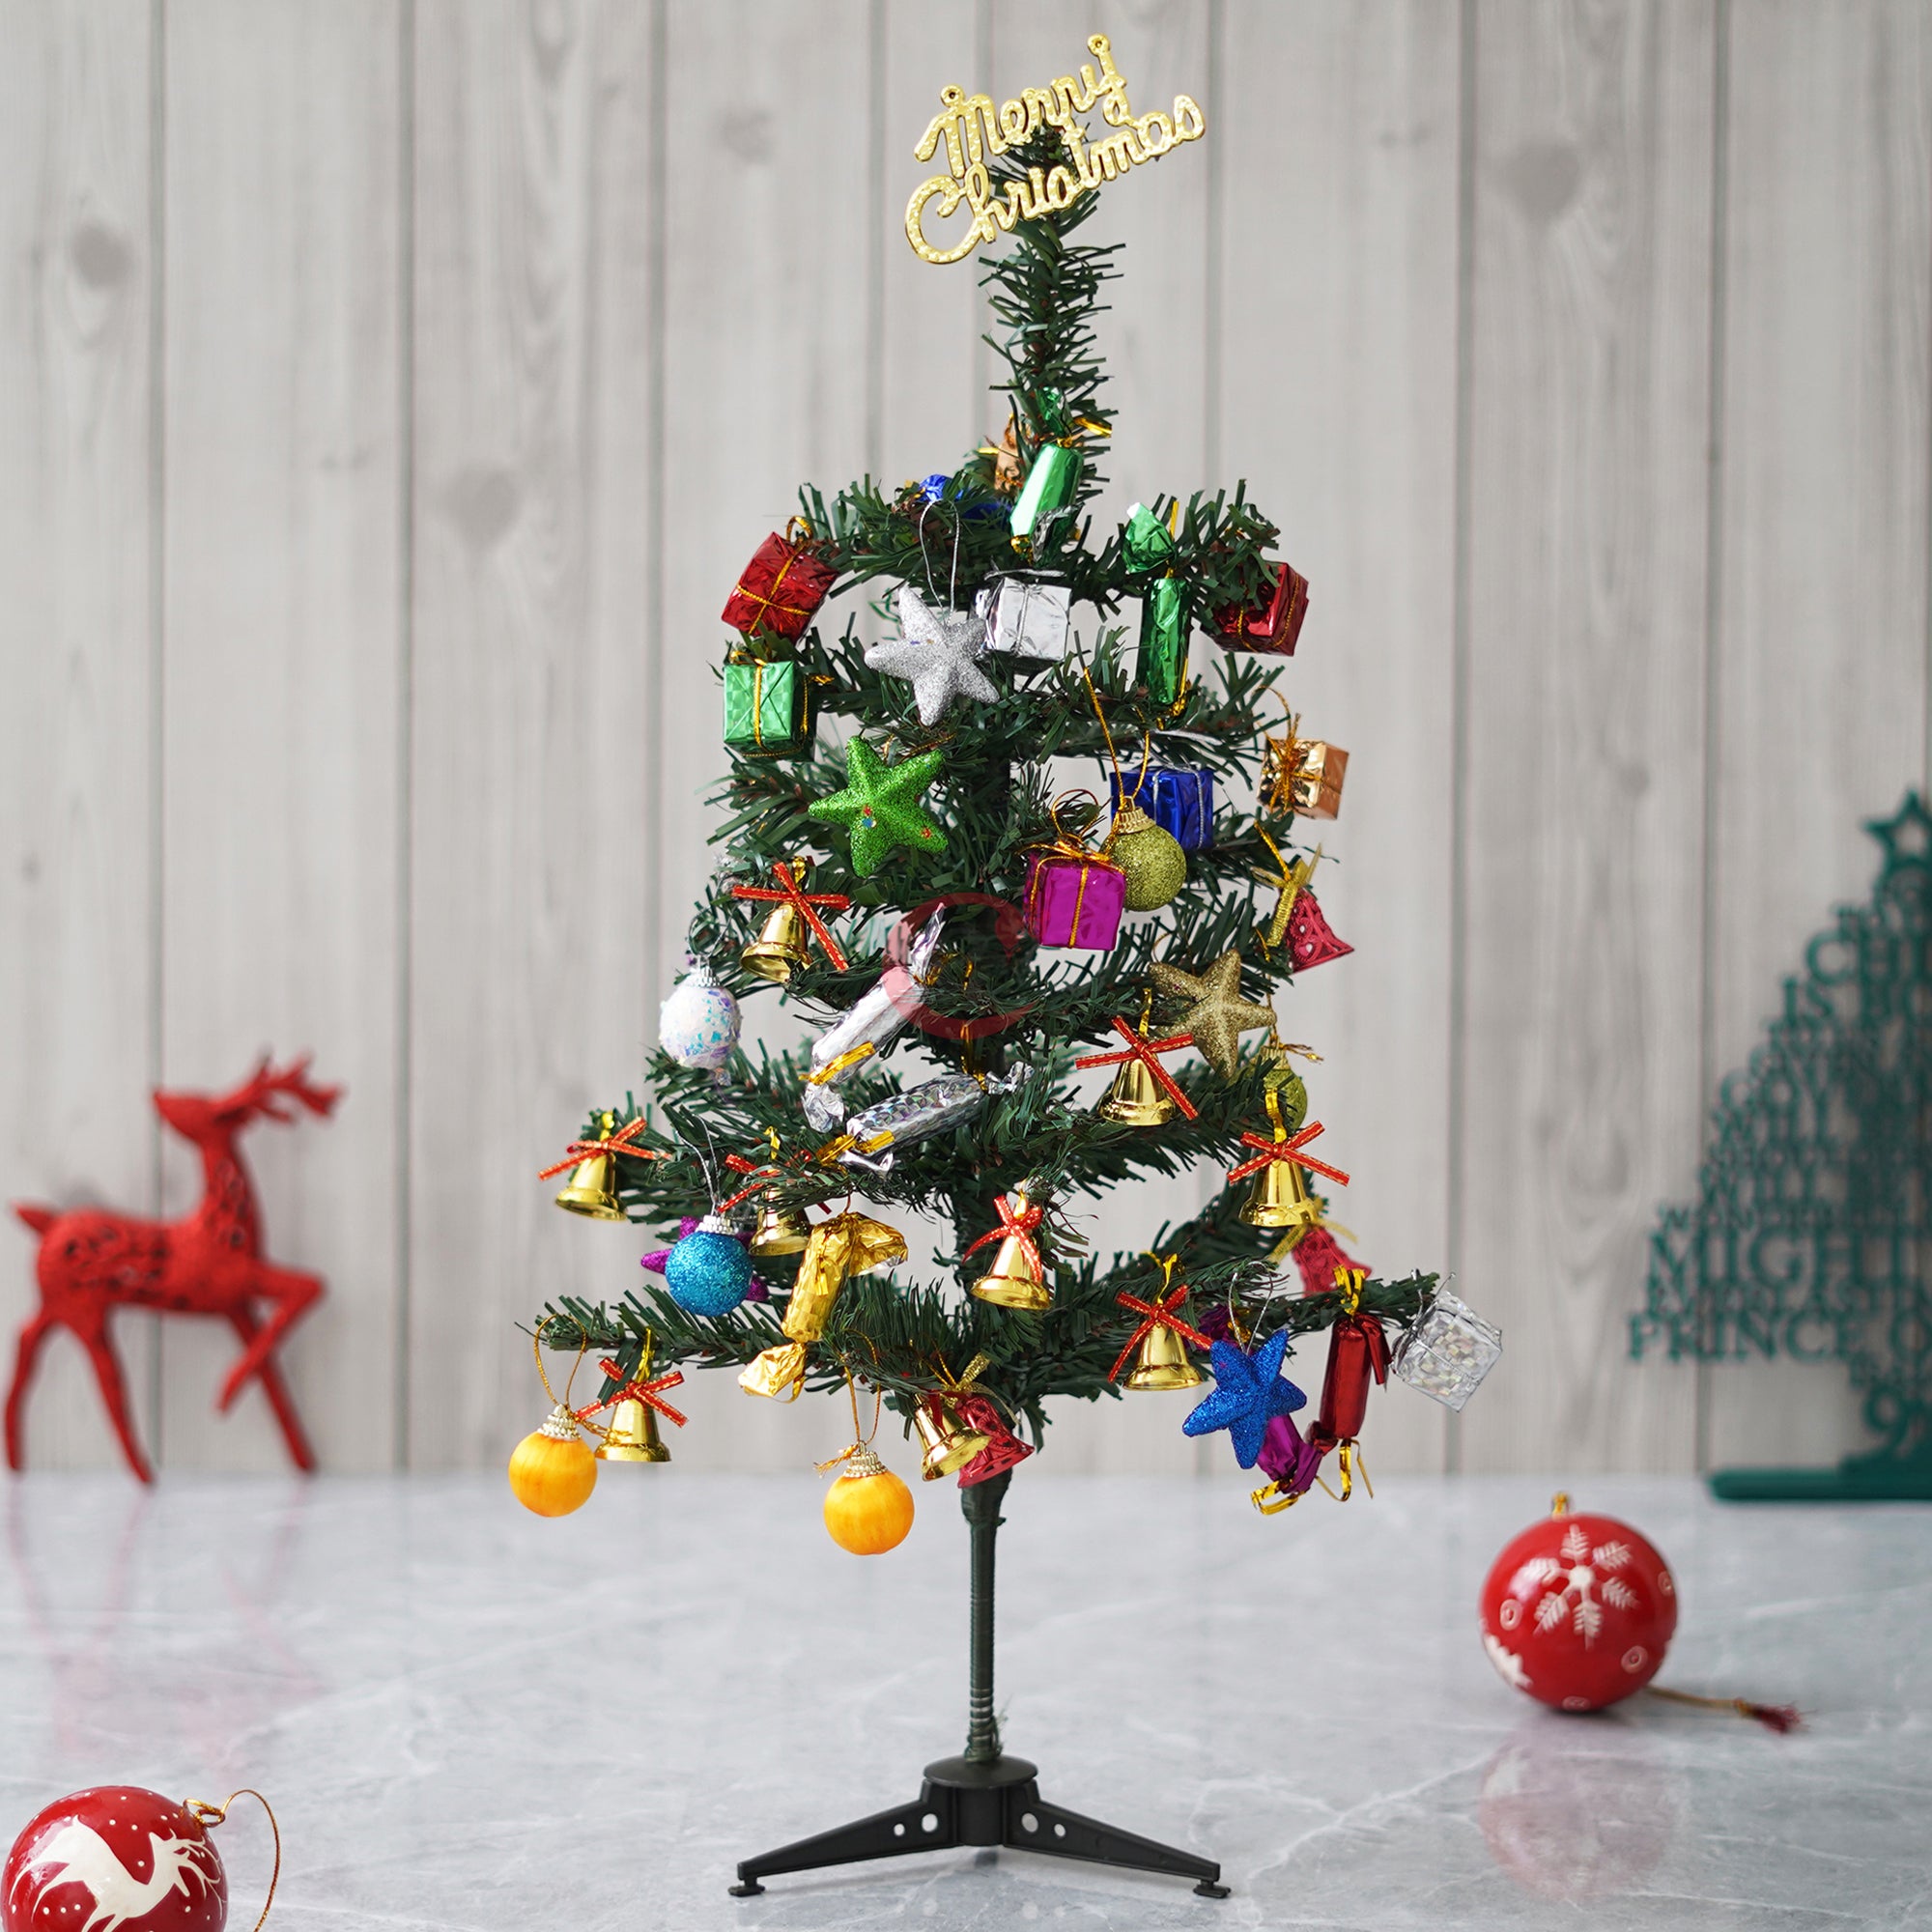 eCraftIndia 2 Feet Green Artificial Christmas Tree Xmas Pine Tree with Stand and 60 Christmas Decoration Ornaments Props - Merry Christmas Decoration Item for Home, Office, and Church 1